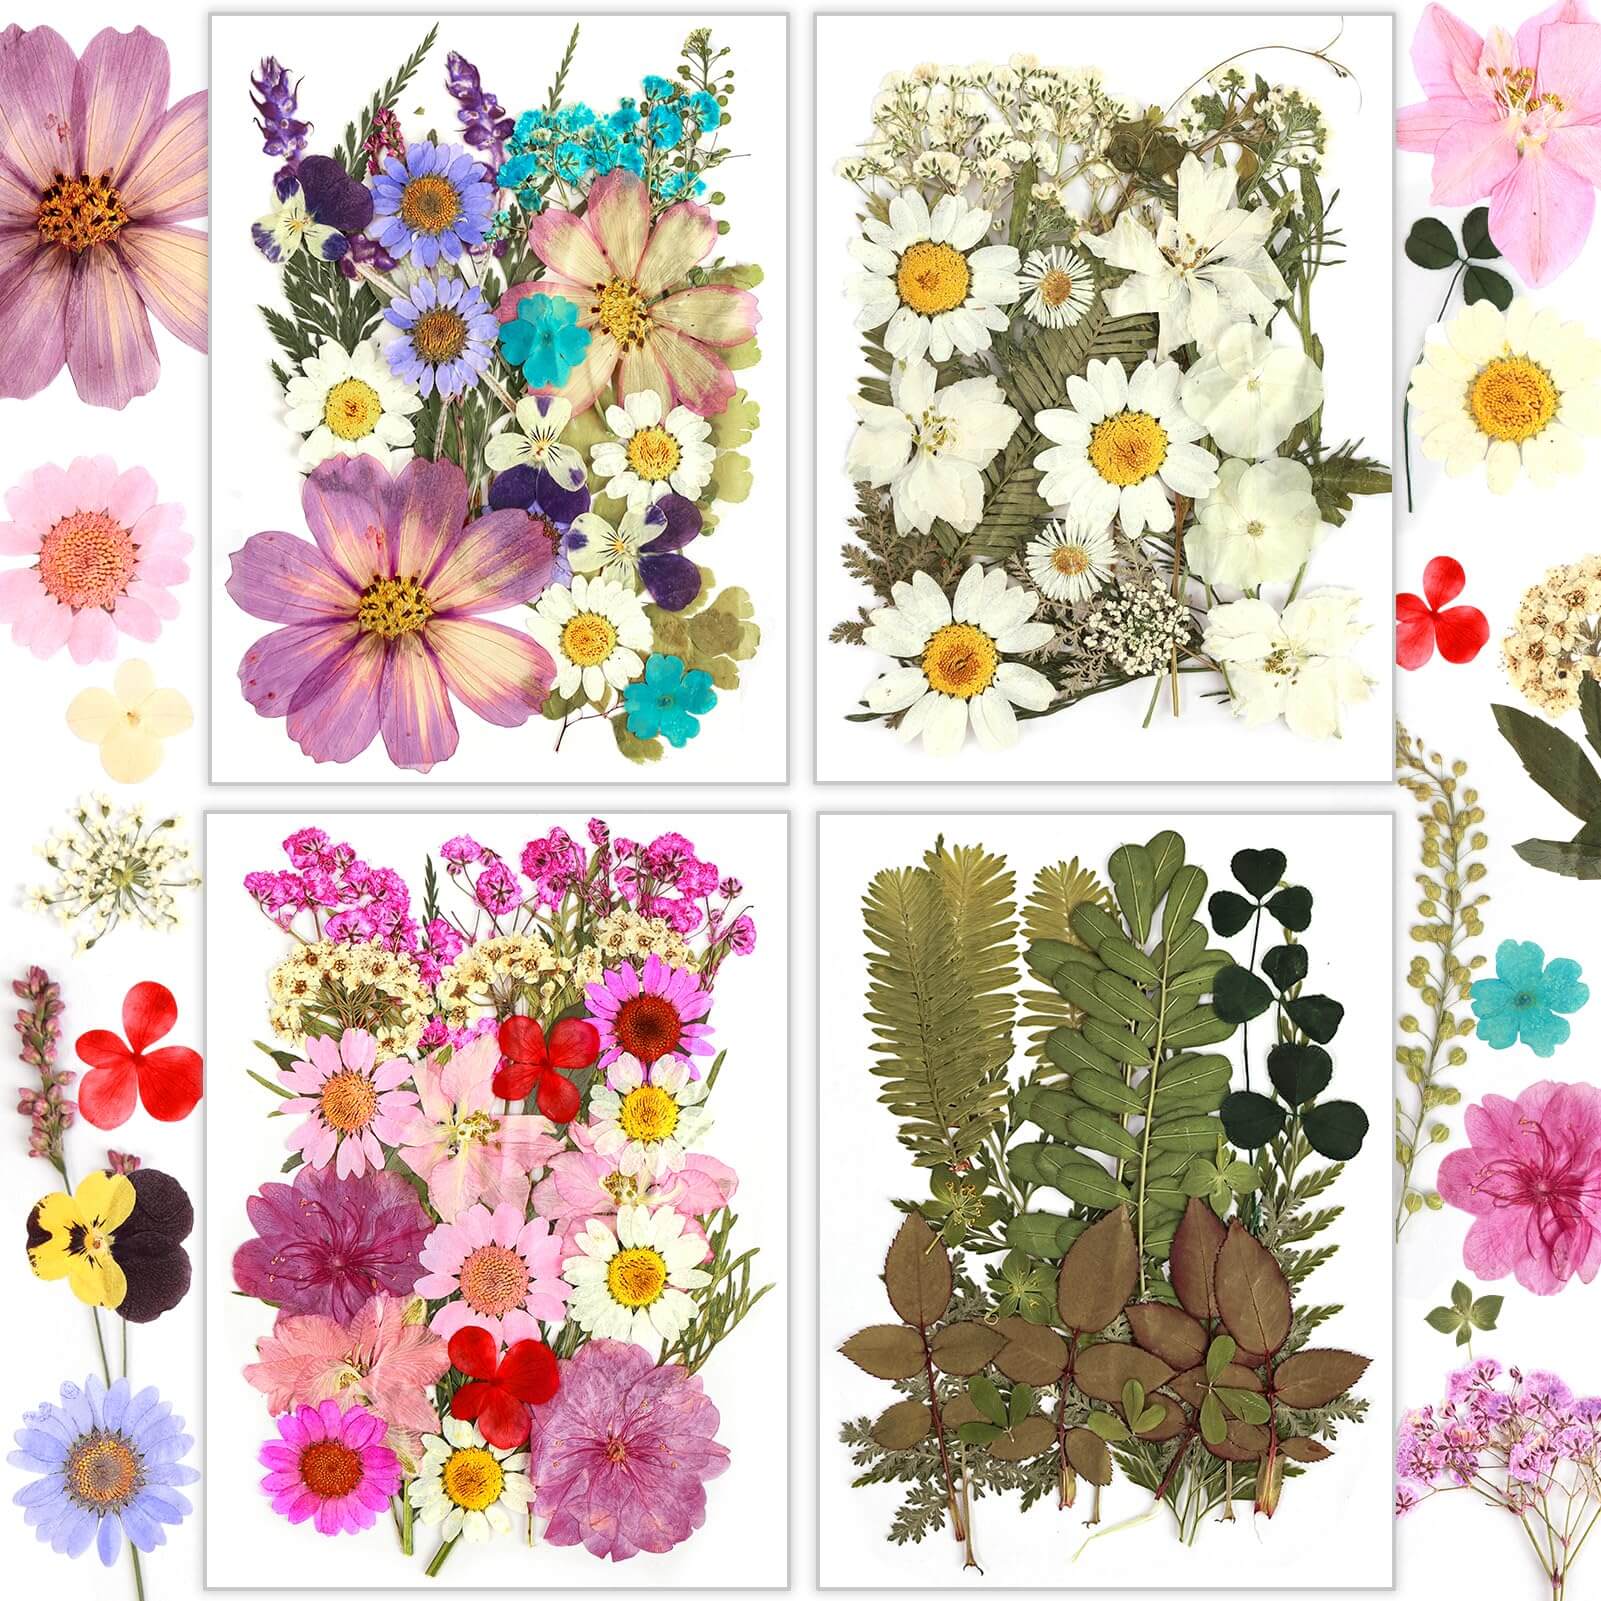 42pcs Natural Pressed Dried Flowers Resin, Dry Flowers for Resin Accessories with Tweezer, Dried Flower for Scrapbooking DIY Art Crafts, Epoxy Resin